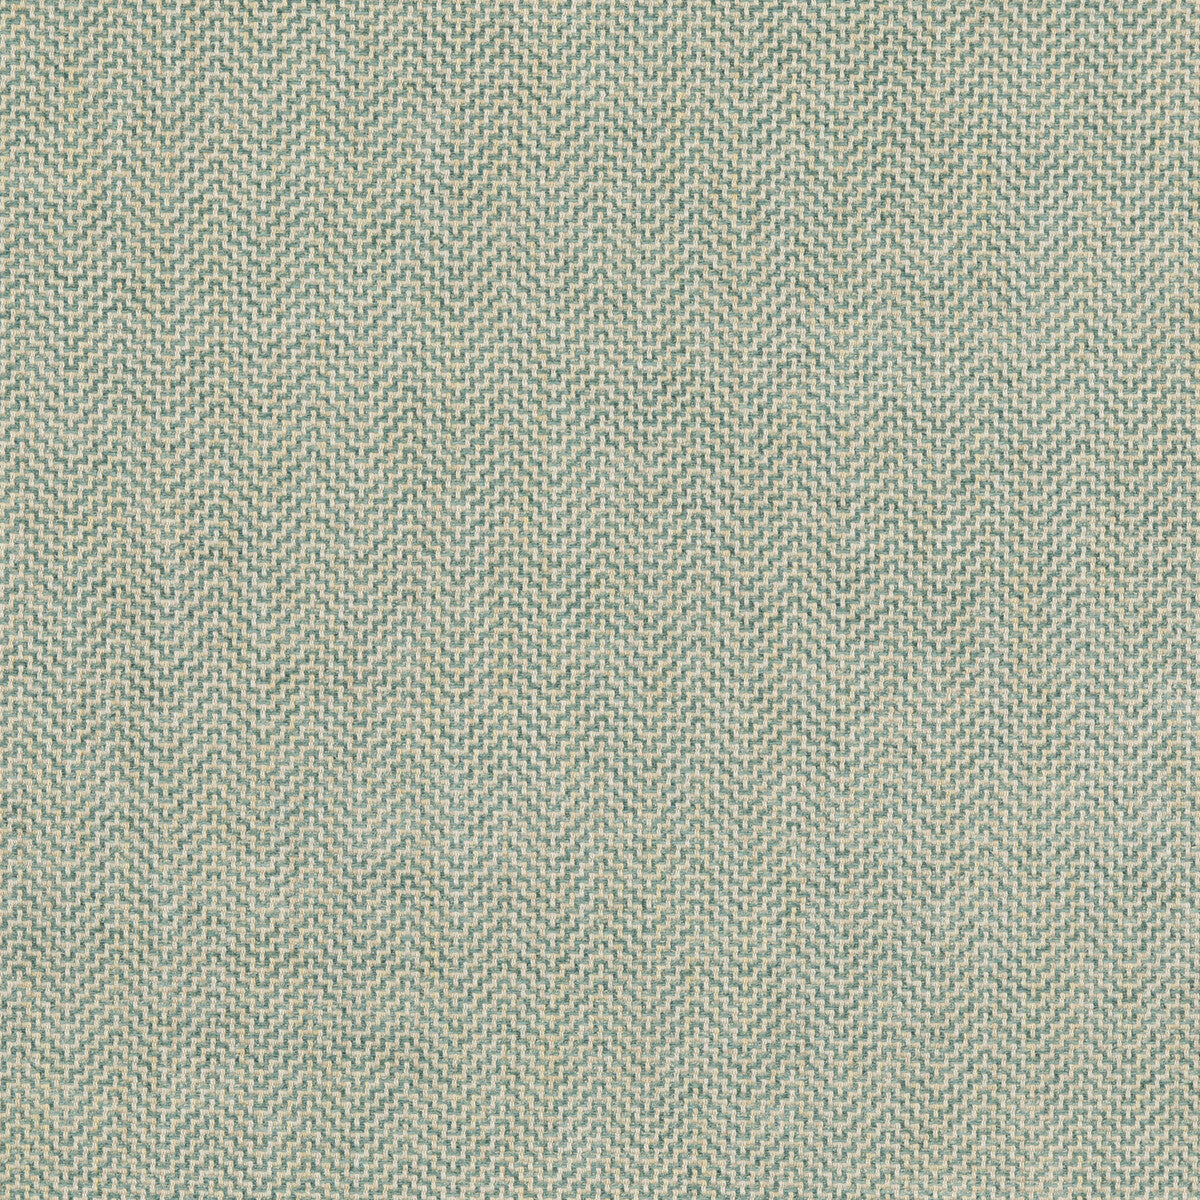 Glanville fabric in soft teal color - pattern BF10873.606.0 - by G P &amp; J Baker in the Essential Colours II collection